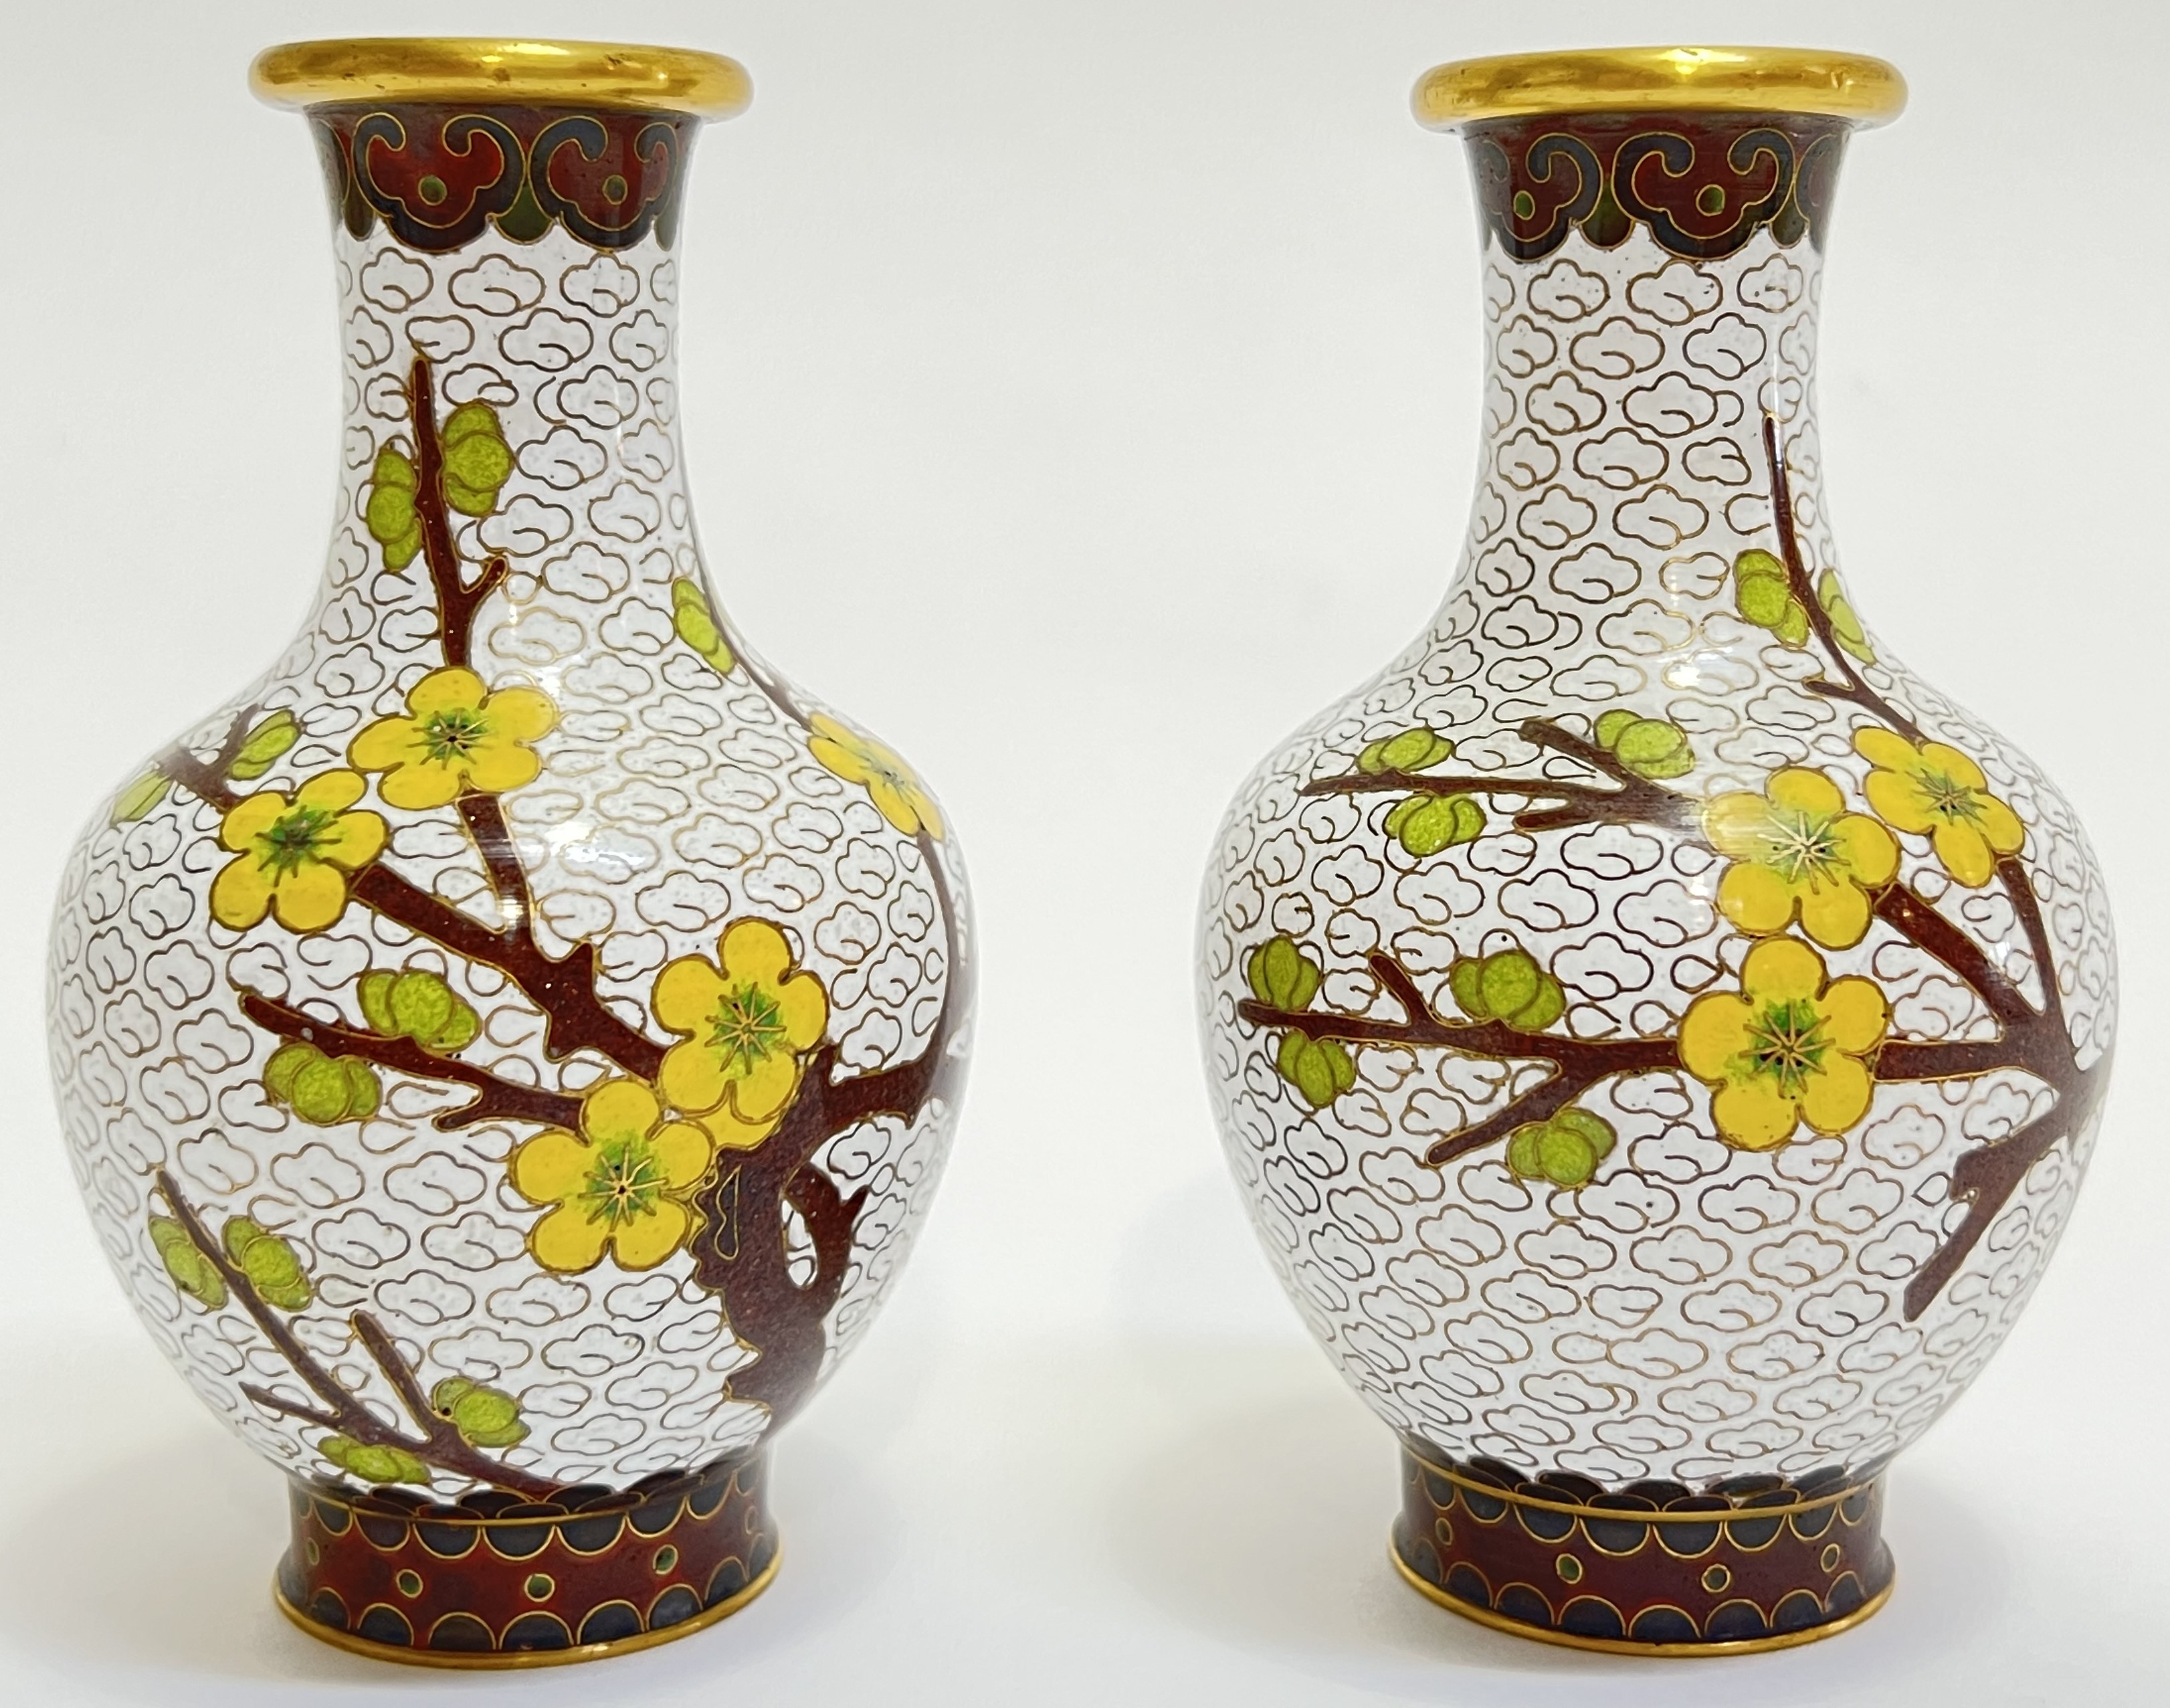 A pair of Chinese cloisonne enamel vases decorated with prunus blossoms against a white ground